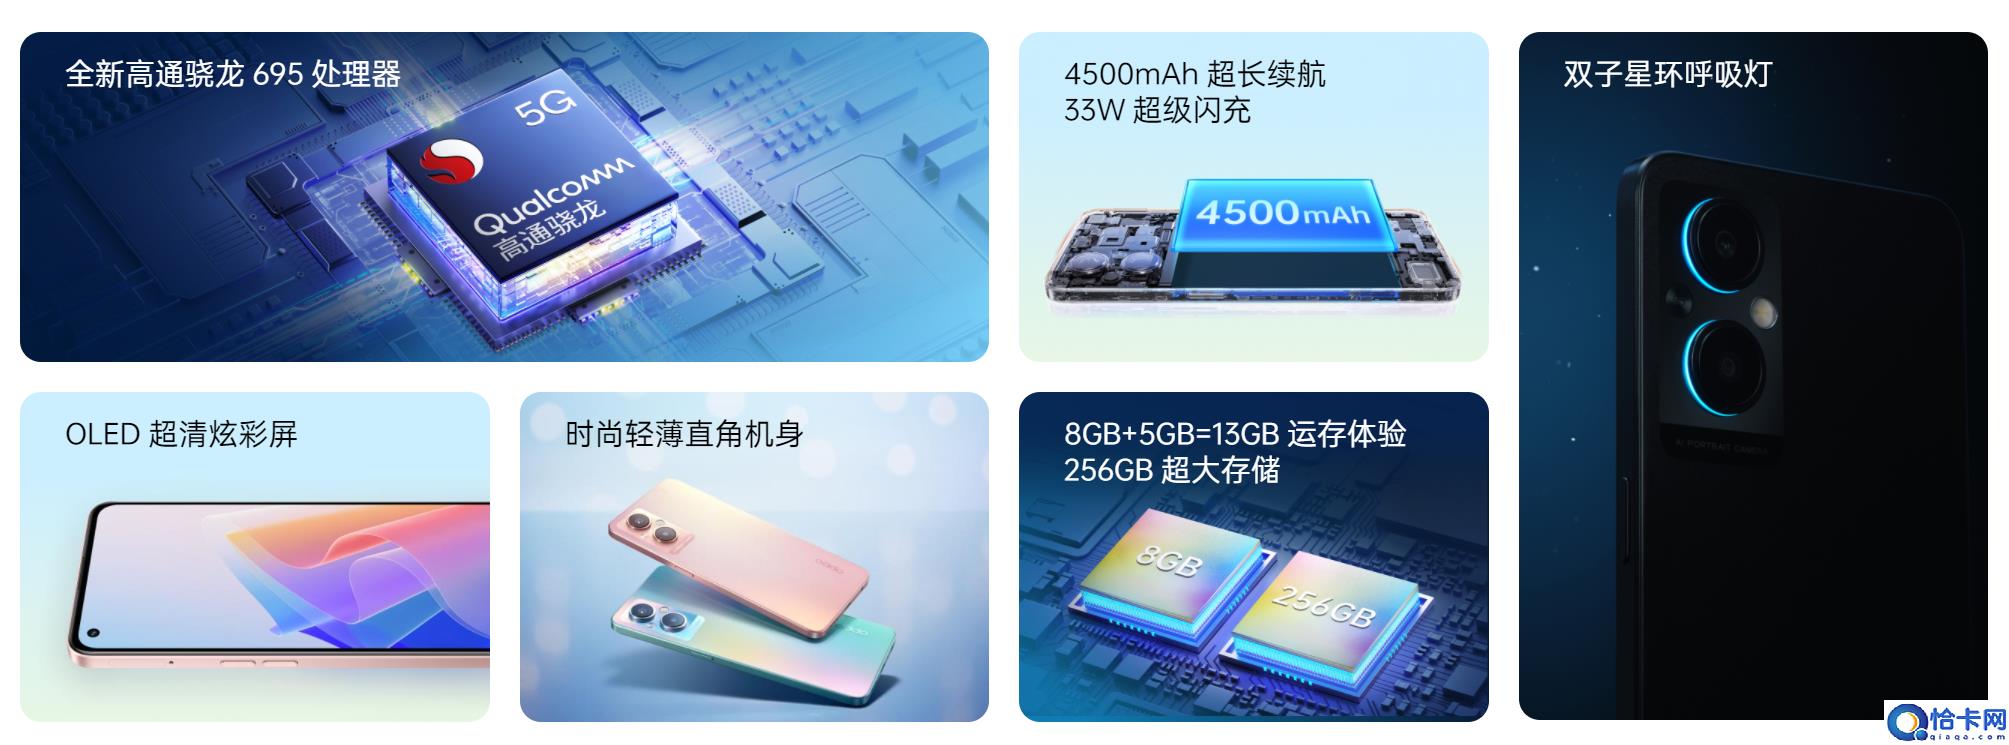 oppo a96值得入手吗(OPPO A96参数规格)